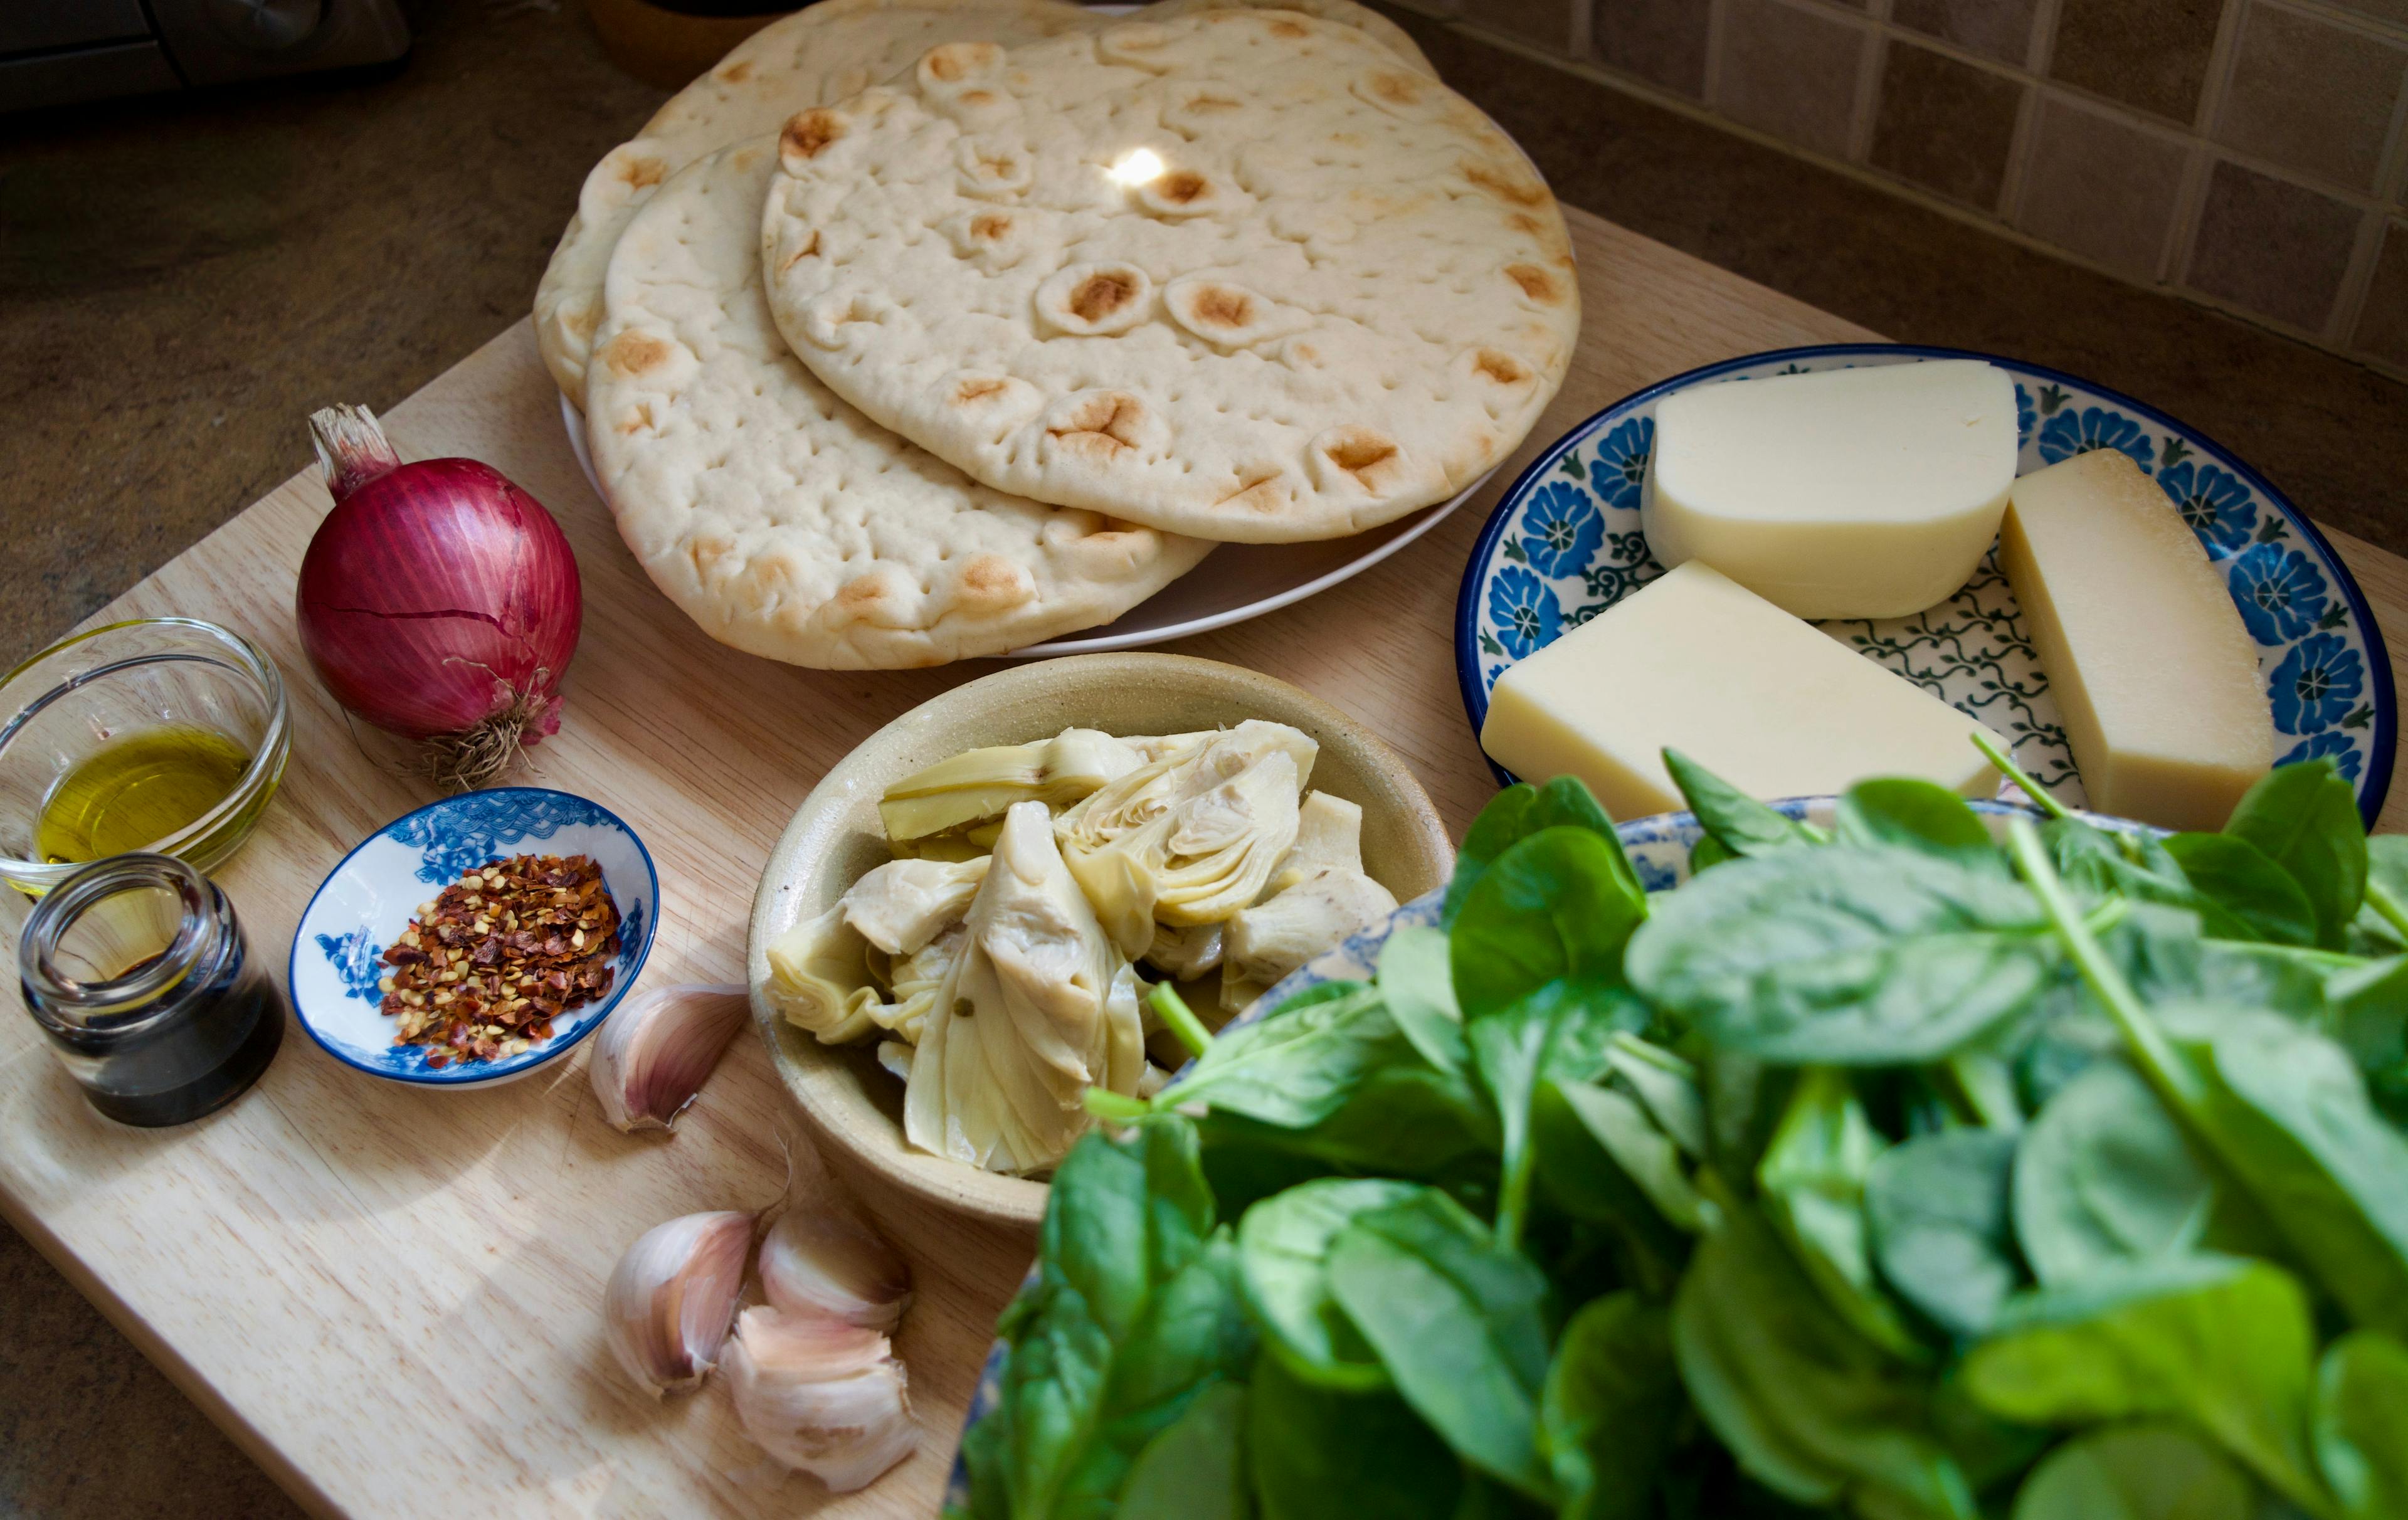 Ingredients portioned out - spinach, cheeses, artichoke hearts, garlic cloves, red onion, naan, red pepper flakes, balsamic vinegar, olive oil